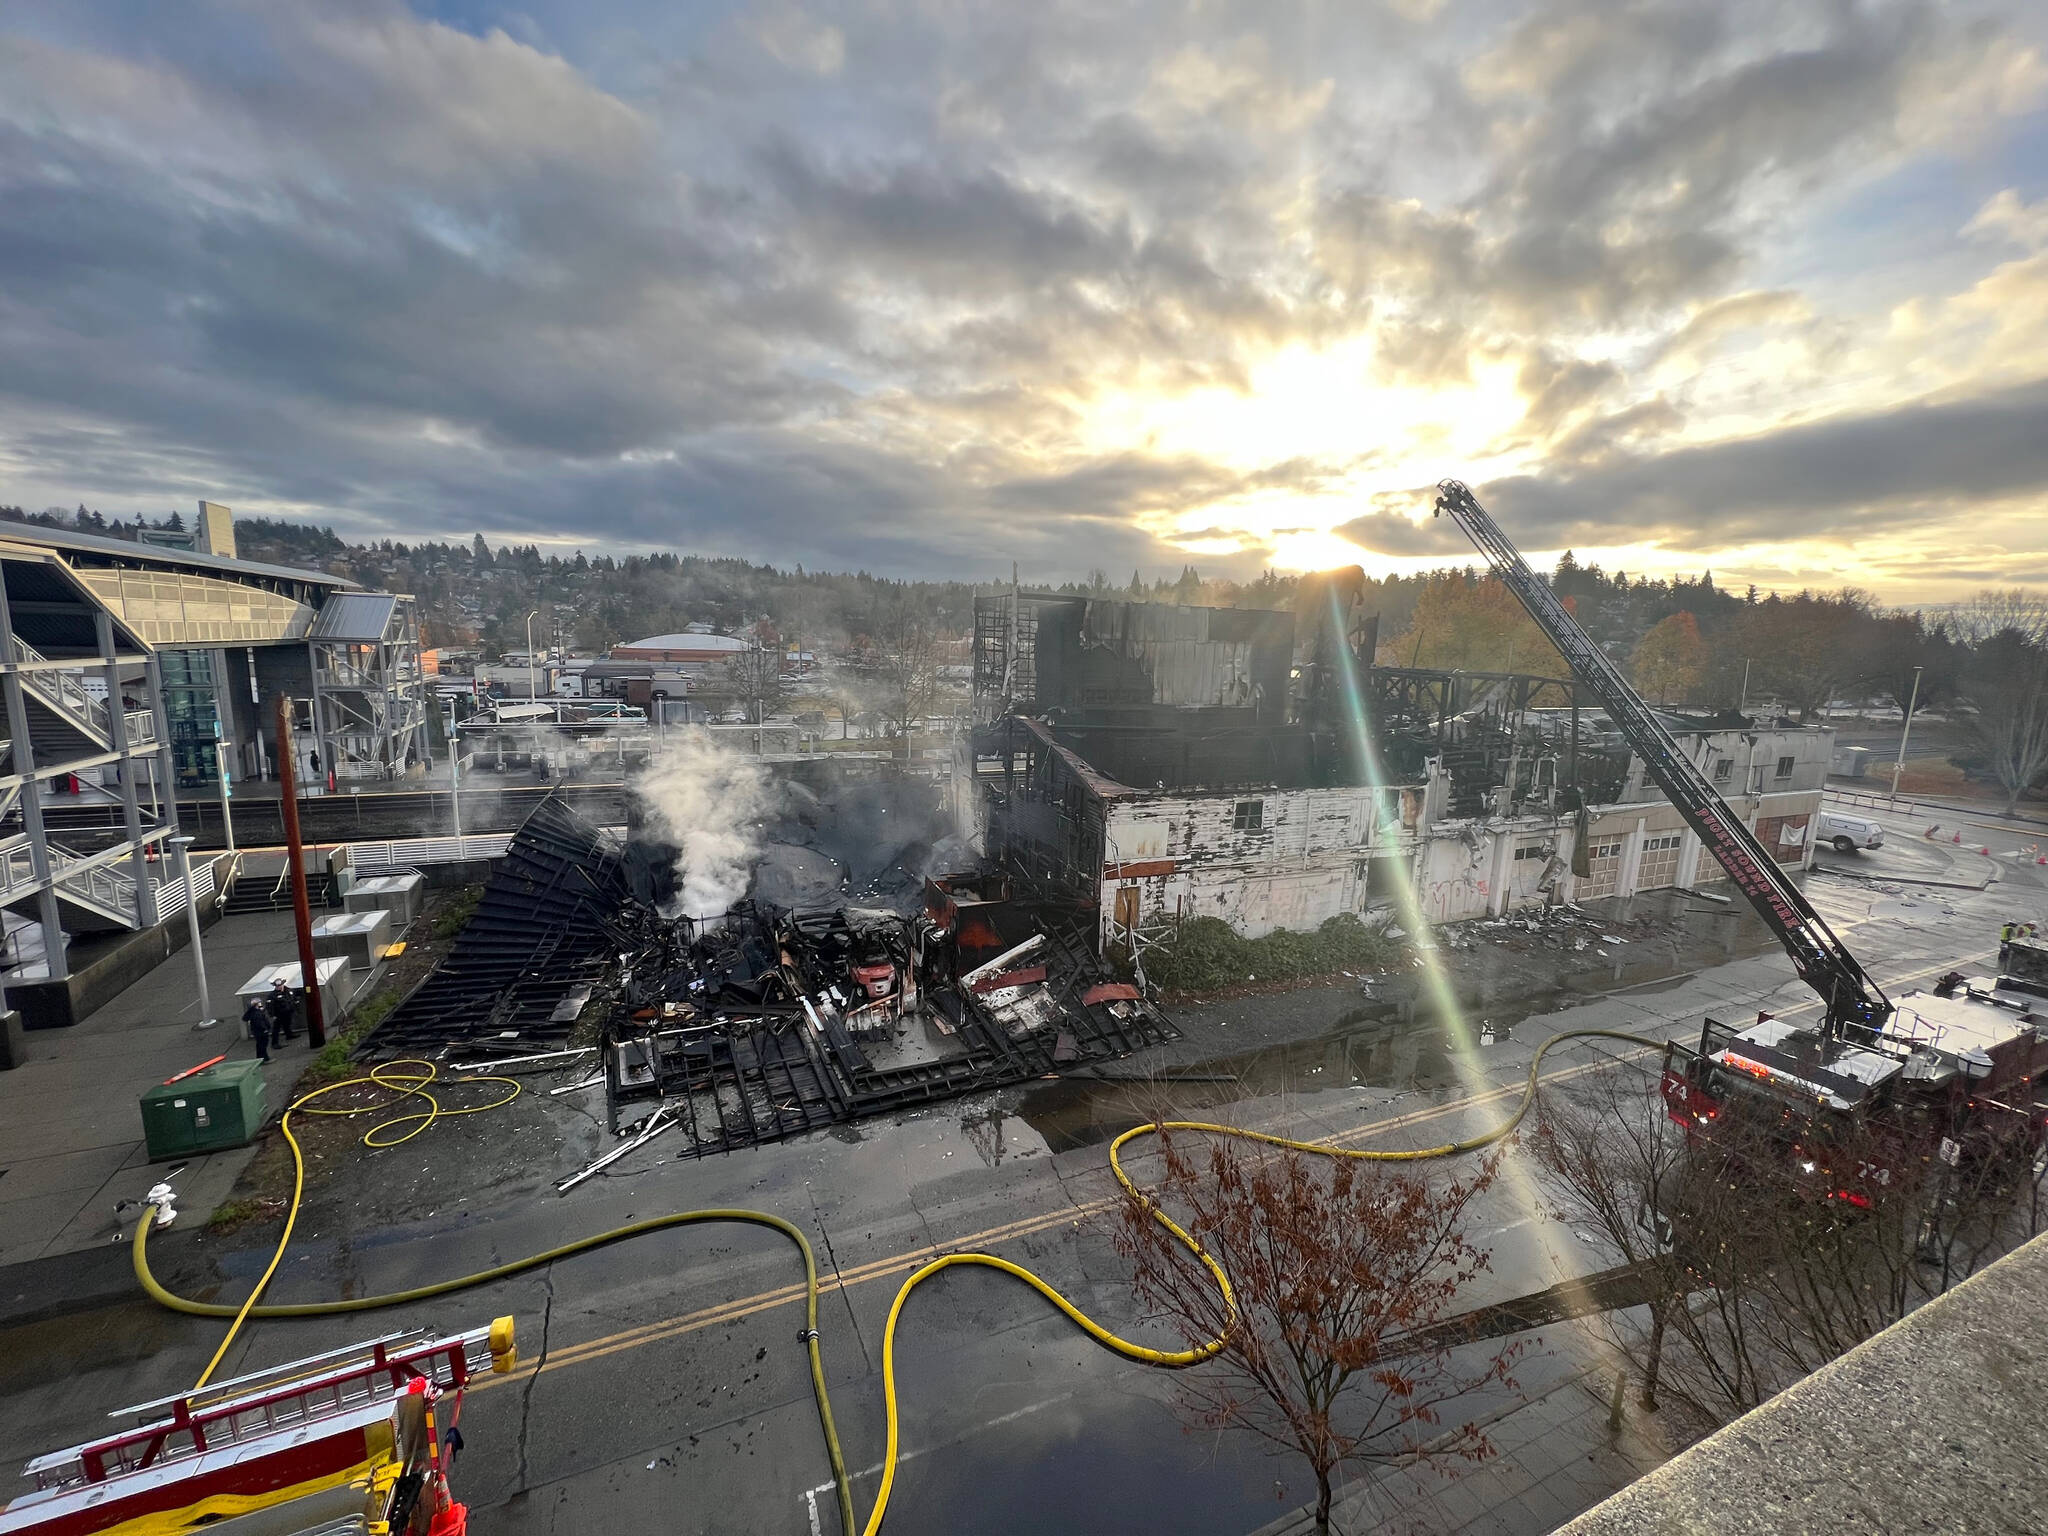 It took firefighters about two hours to extinguish a blaze Friday morning, Dec. 9 at a vacant warehouse at 105 W. Smith St. COURTESY PHOTO, Kent Police